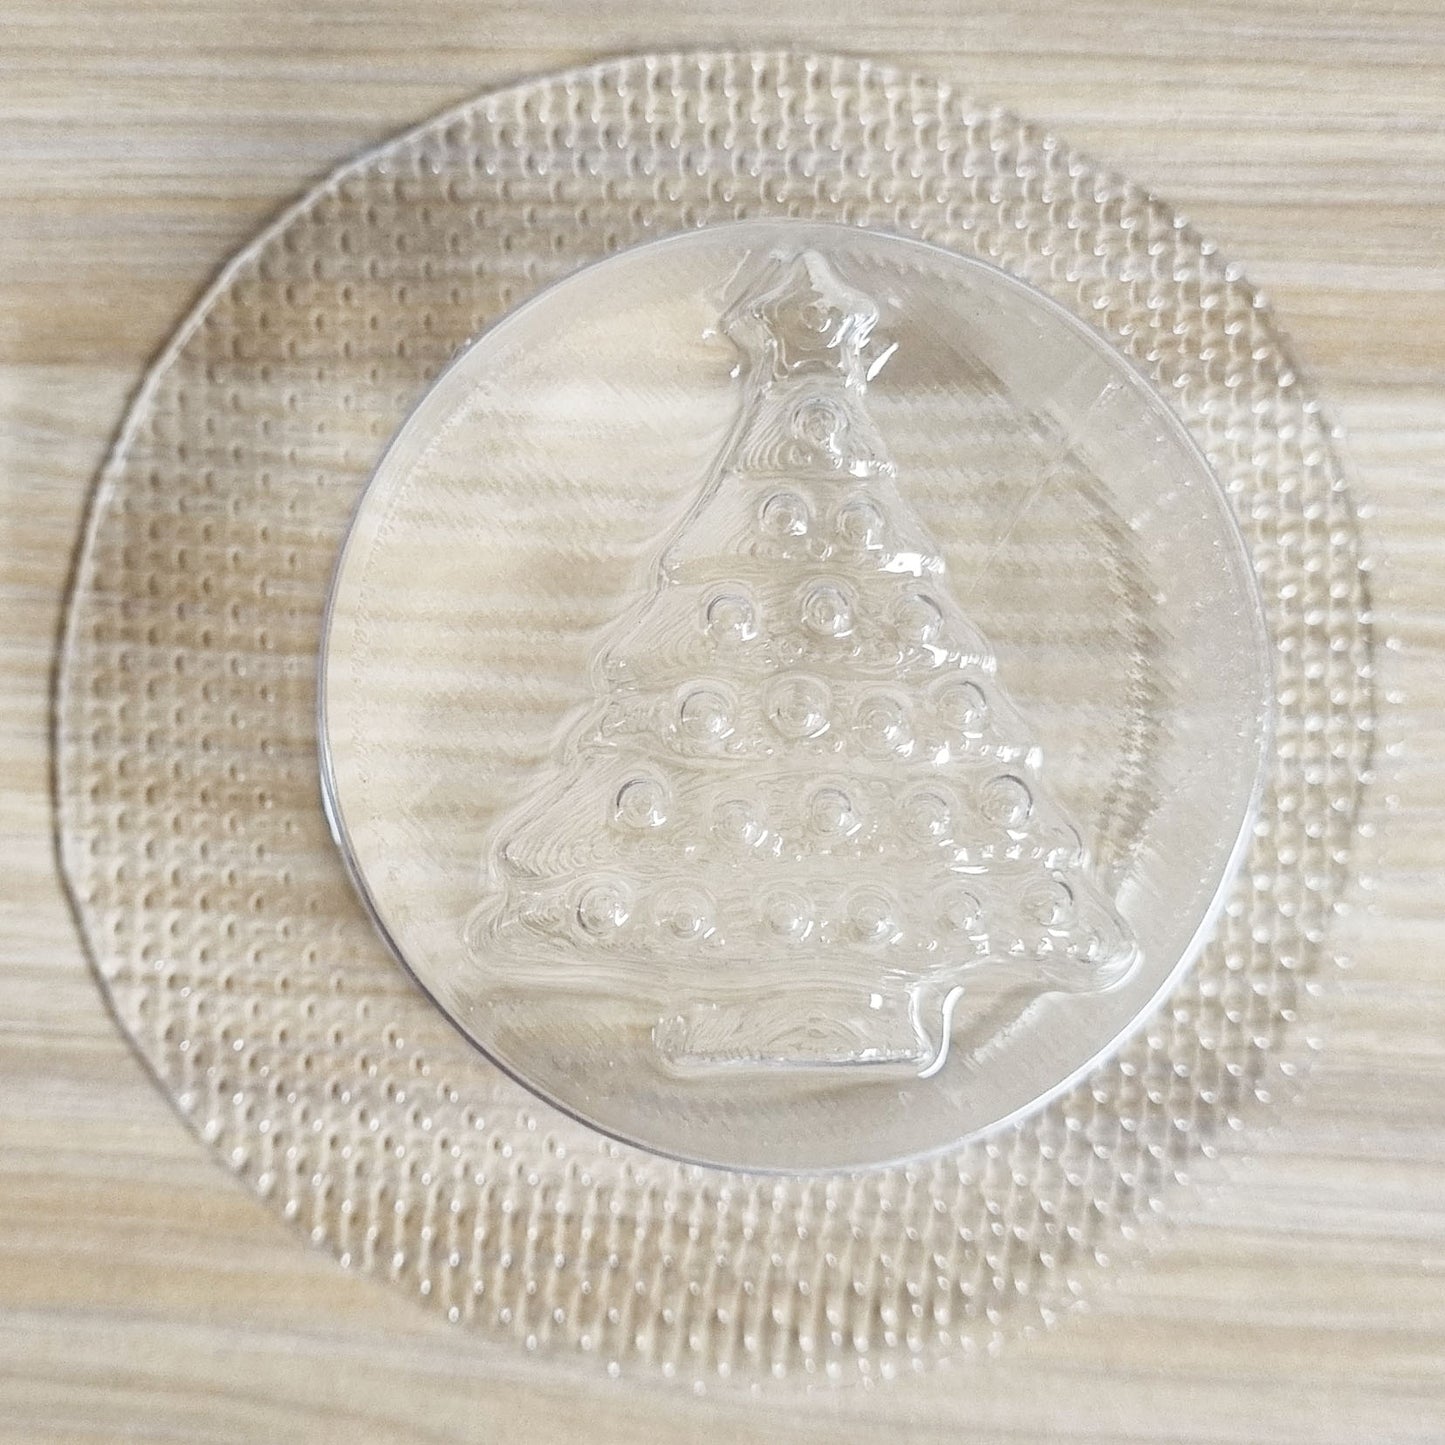 Christmas Tree Advent Mould | Truly Personal | Bath Bomb, Soap, Resin, Chocolate, Jelly, Wax Melts Mold